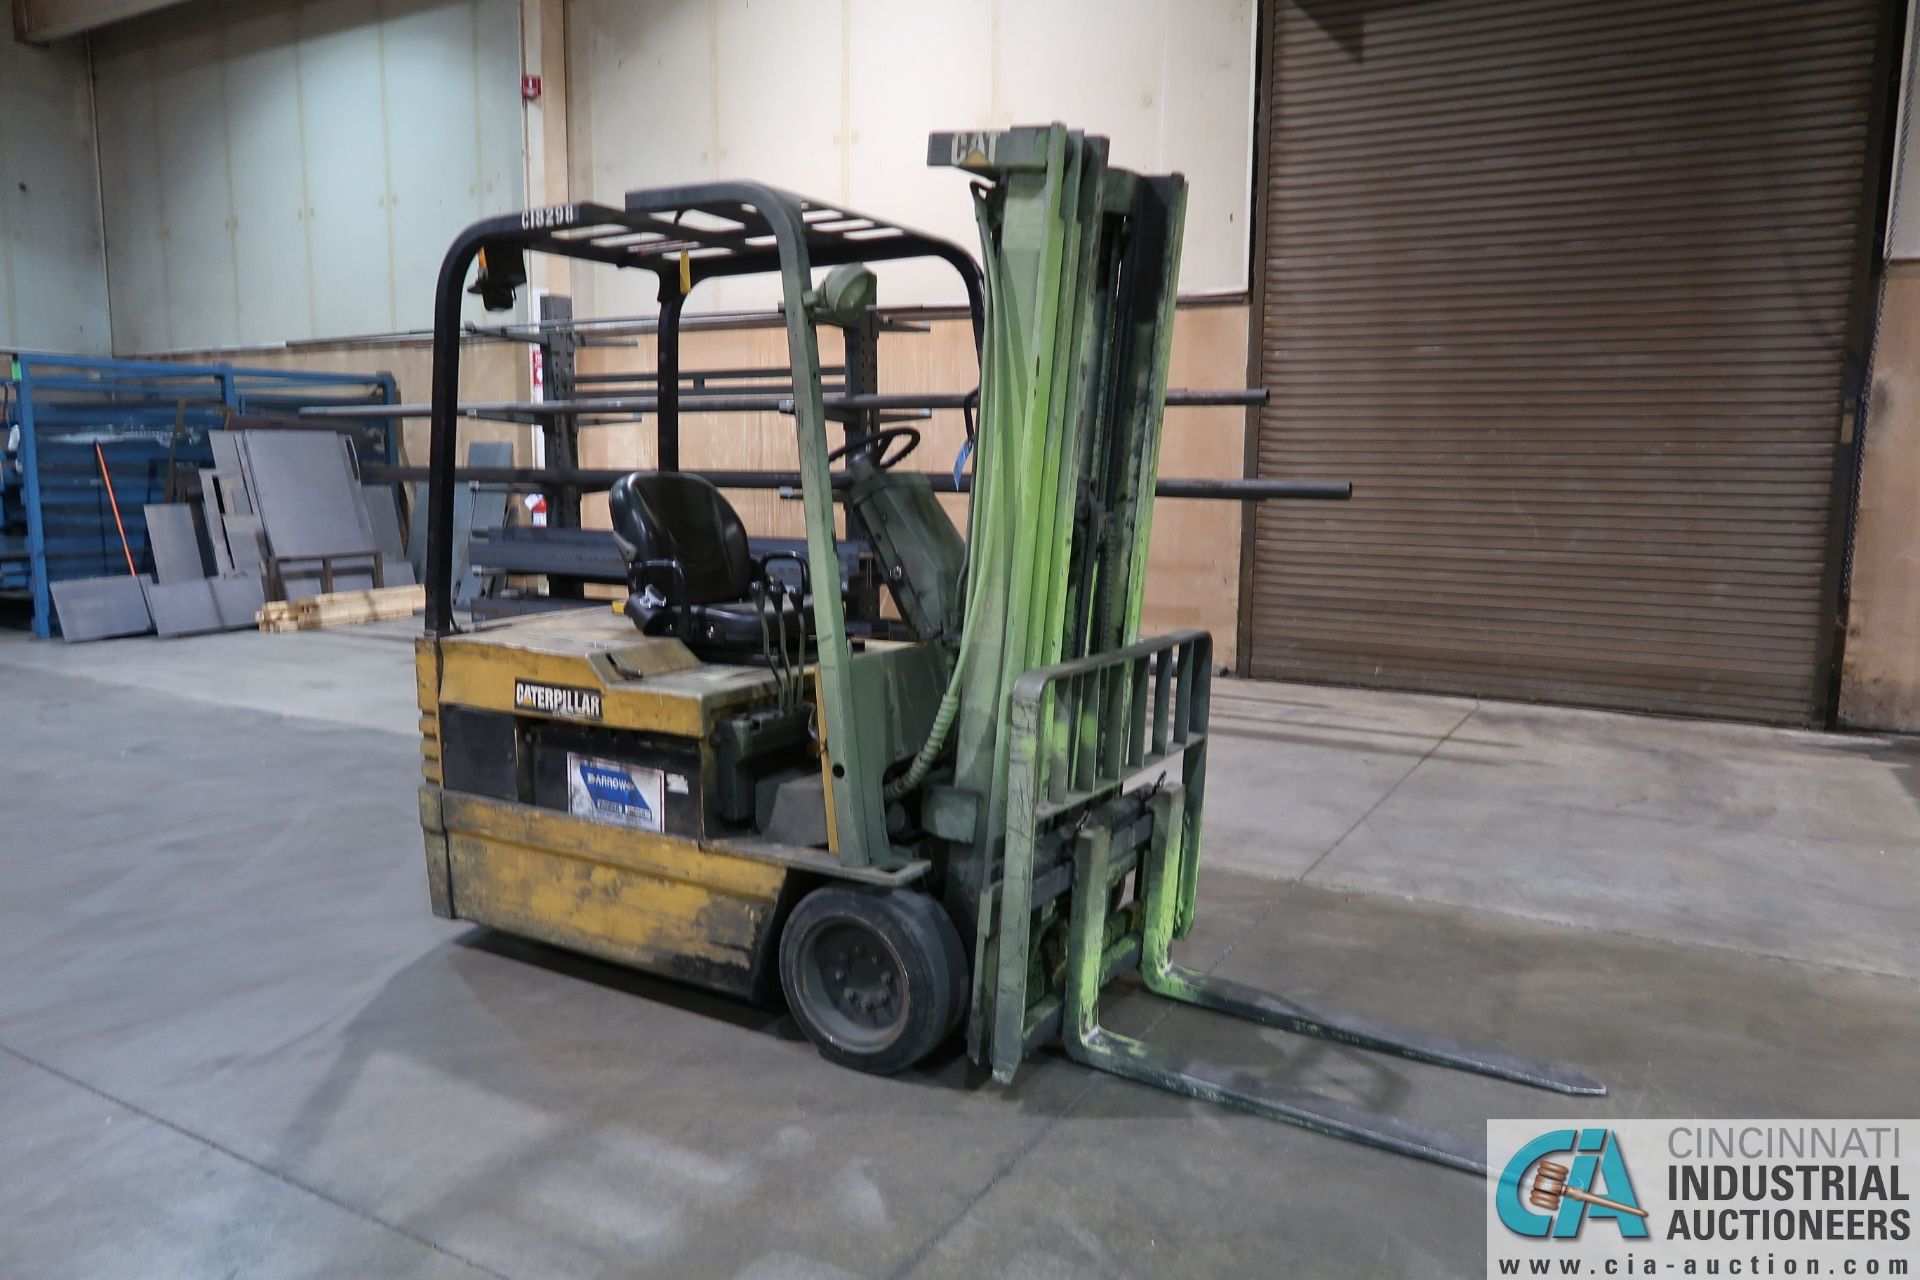 3,600 LB. CATERPILLAR MODEL EP20T-36A SOLID TIRE ELECTRIC TRI-WHEEL LIFT TRUCK; S/N 0296-GMM01583, - Image 2 of 8